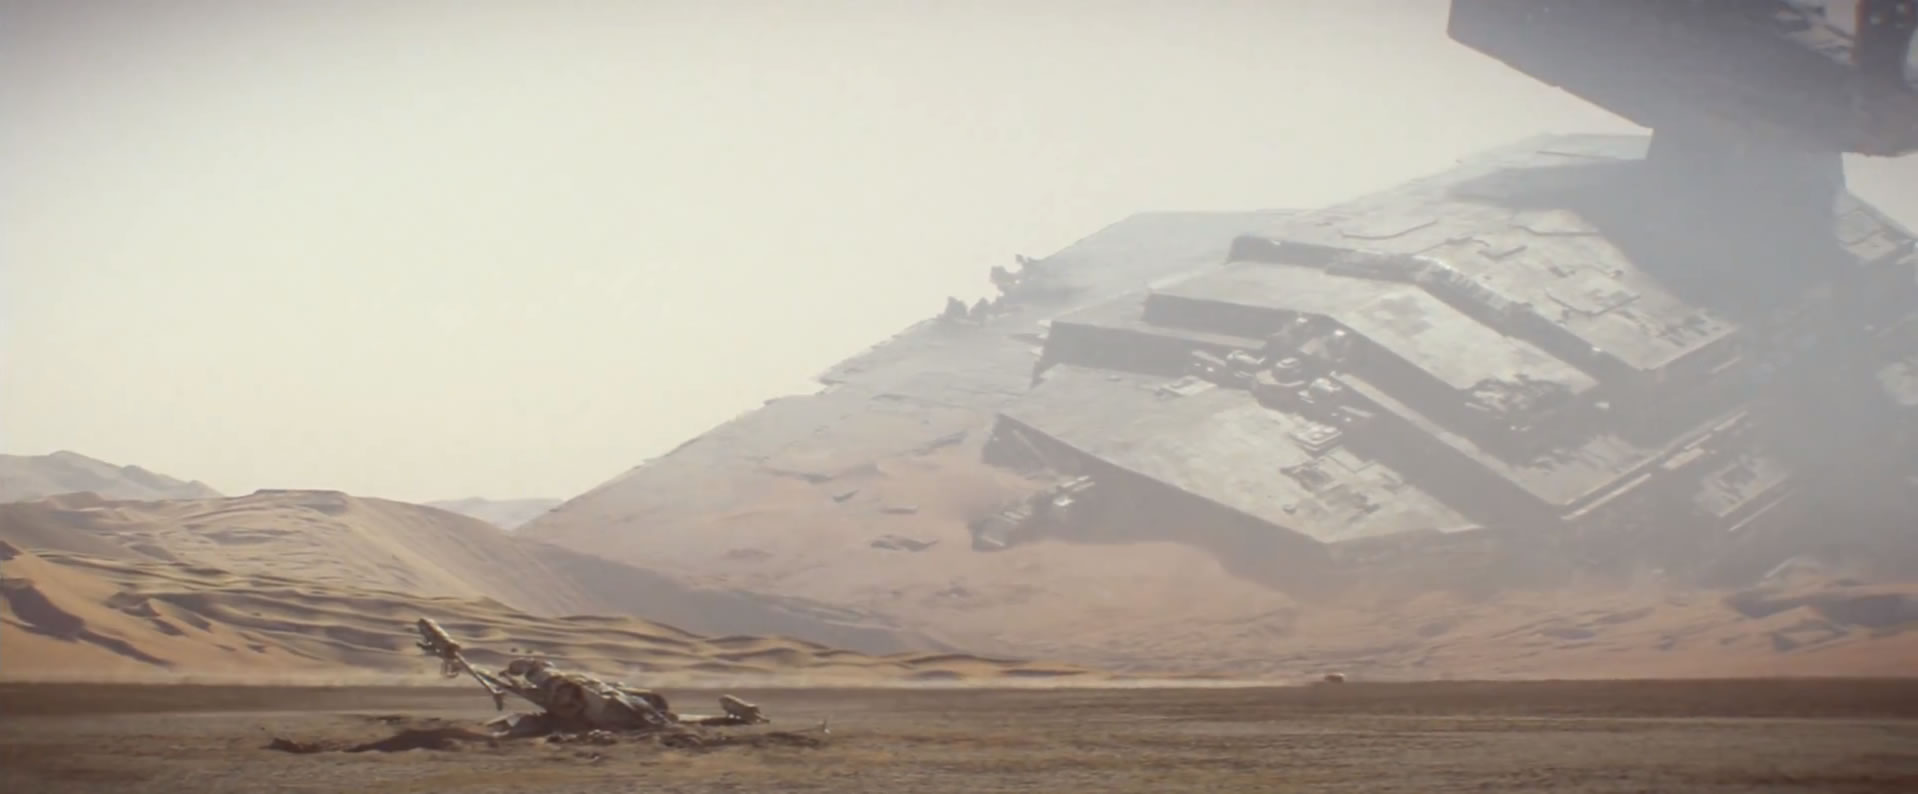 Star Wars: The Force Awakens - What Happened At The Battle of Jakku?